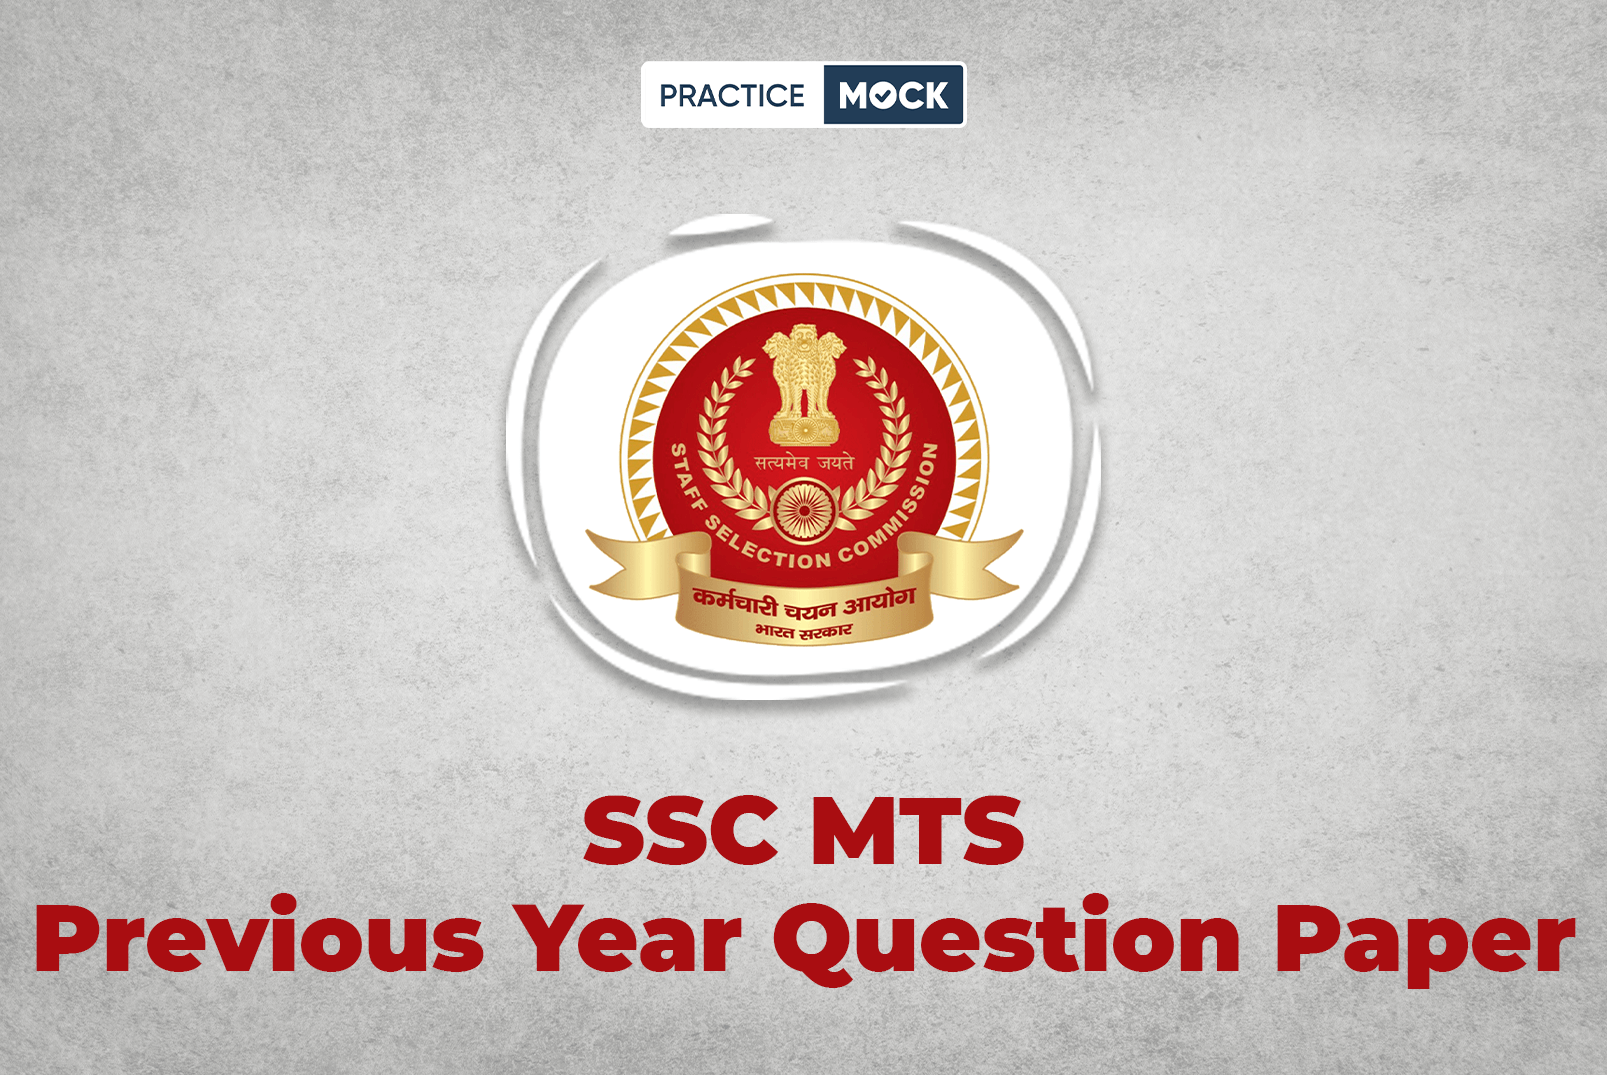 SSC MTS Previous Year Question Paper